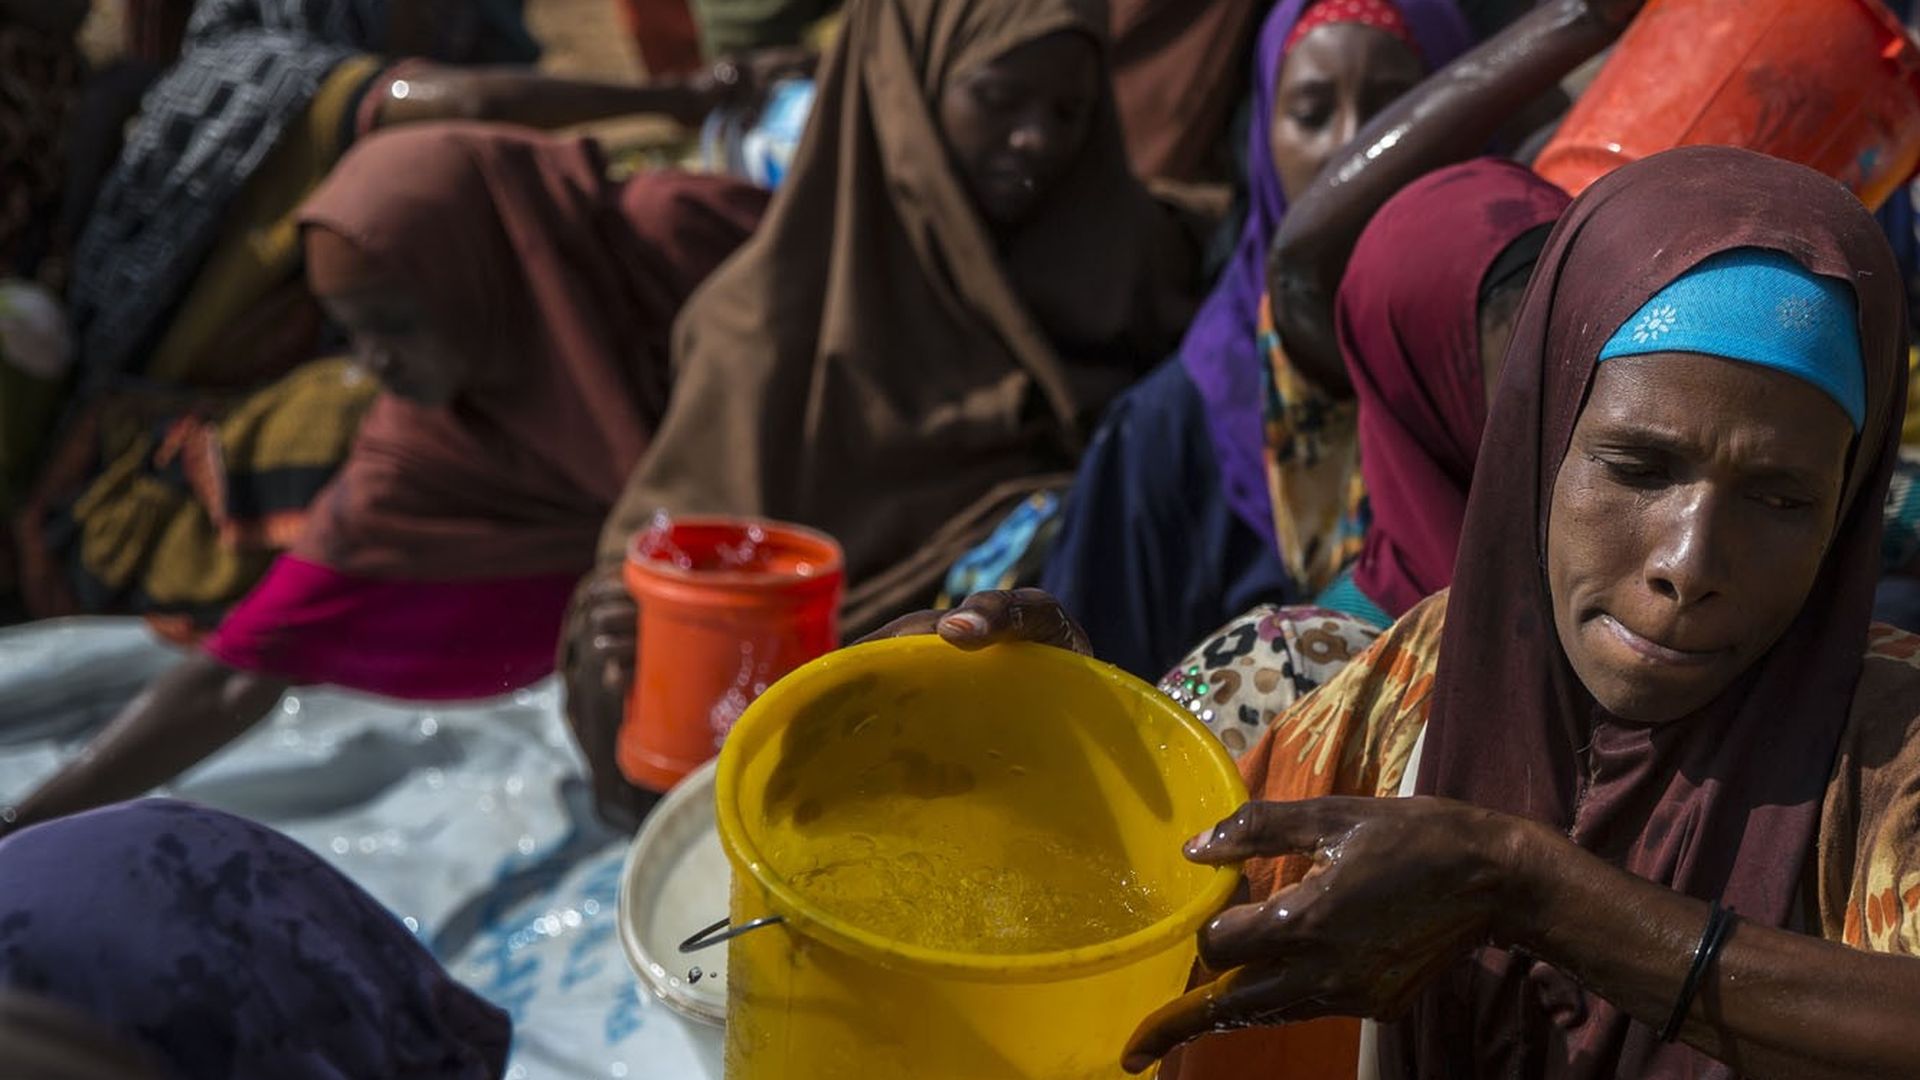 Somalians receive water as extreme drought threatens to leave many people hungry and vulnerable to disease epidemics, in Bay, Somalia on April 2, 2017